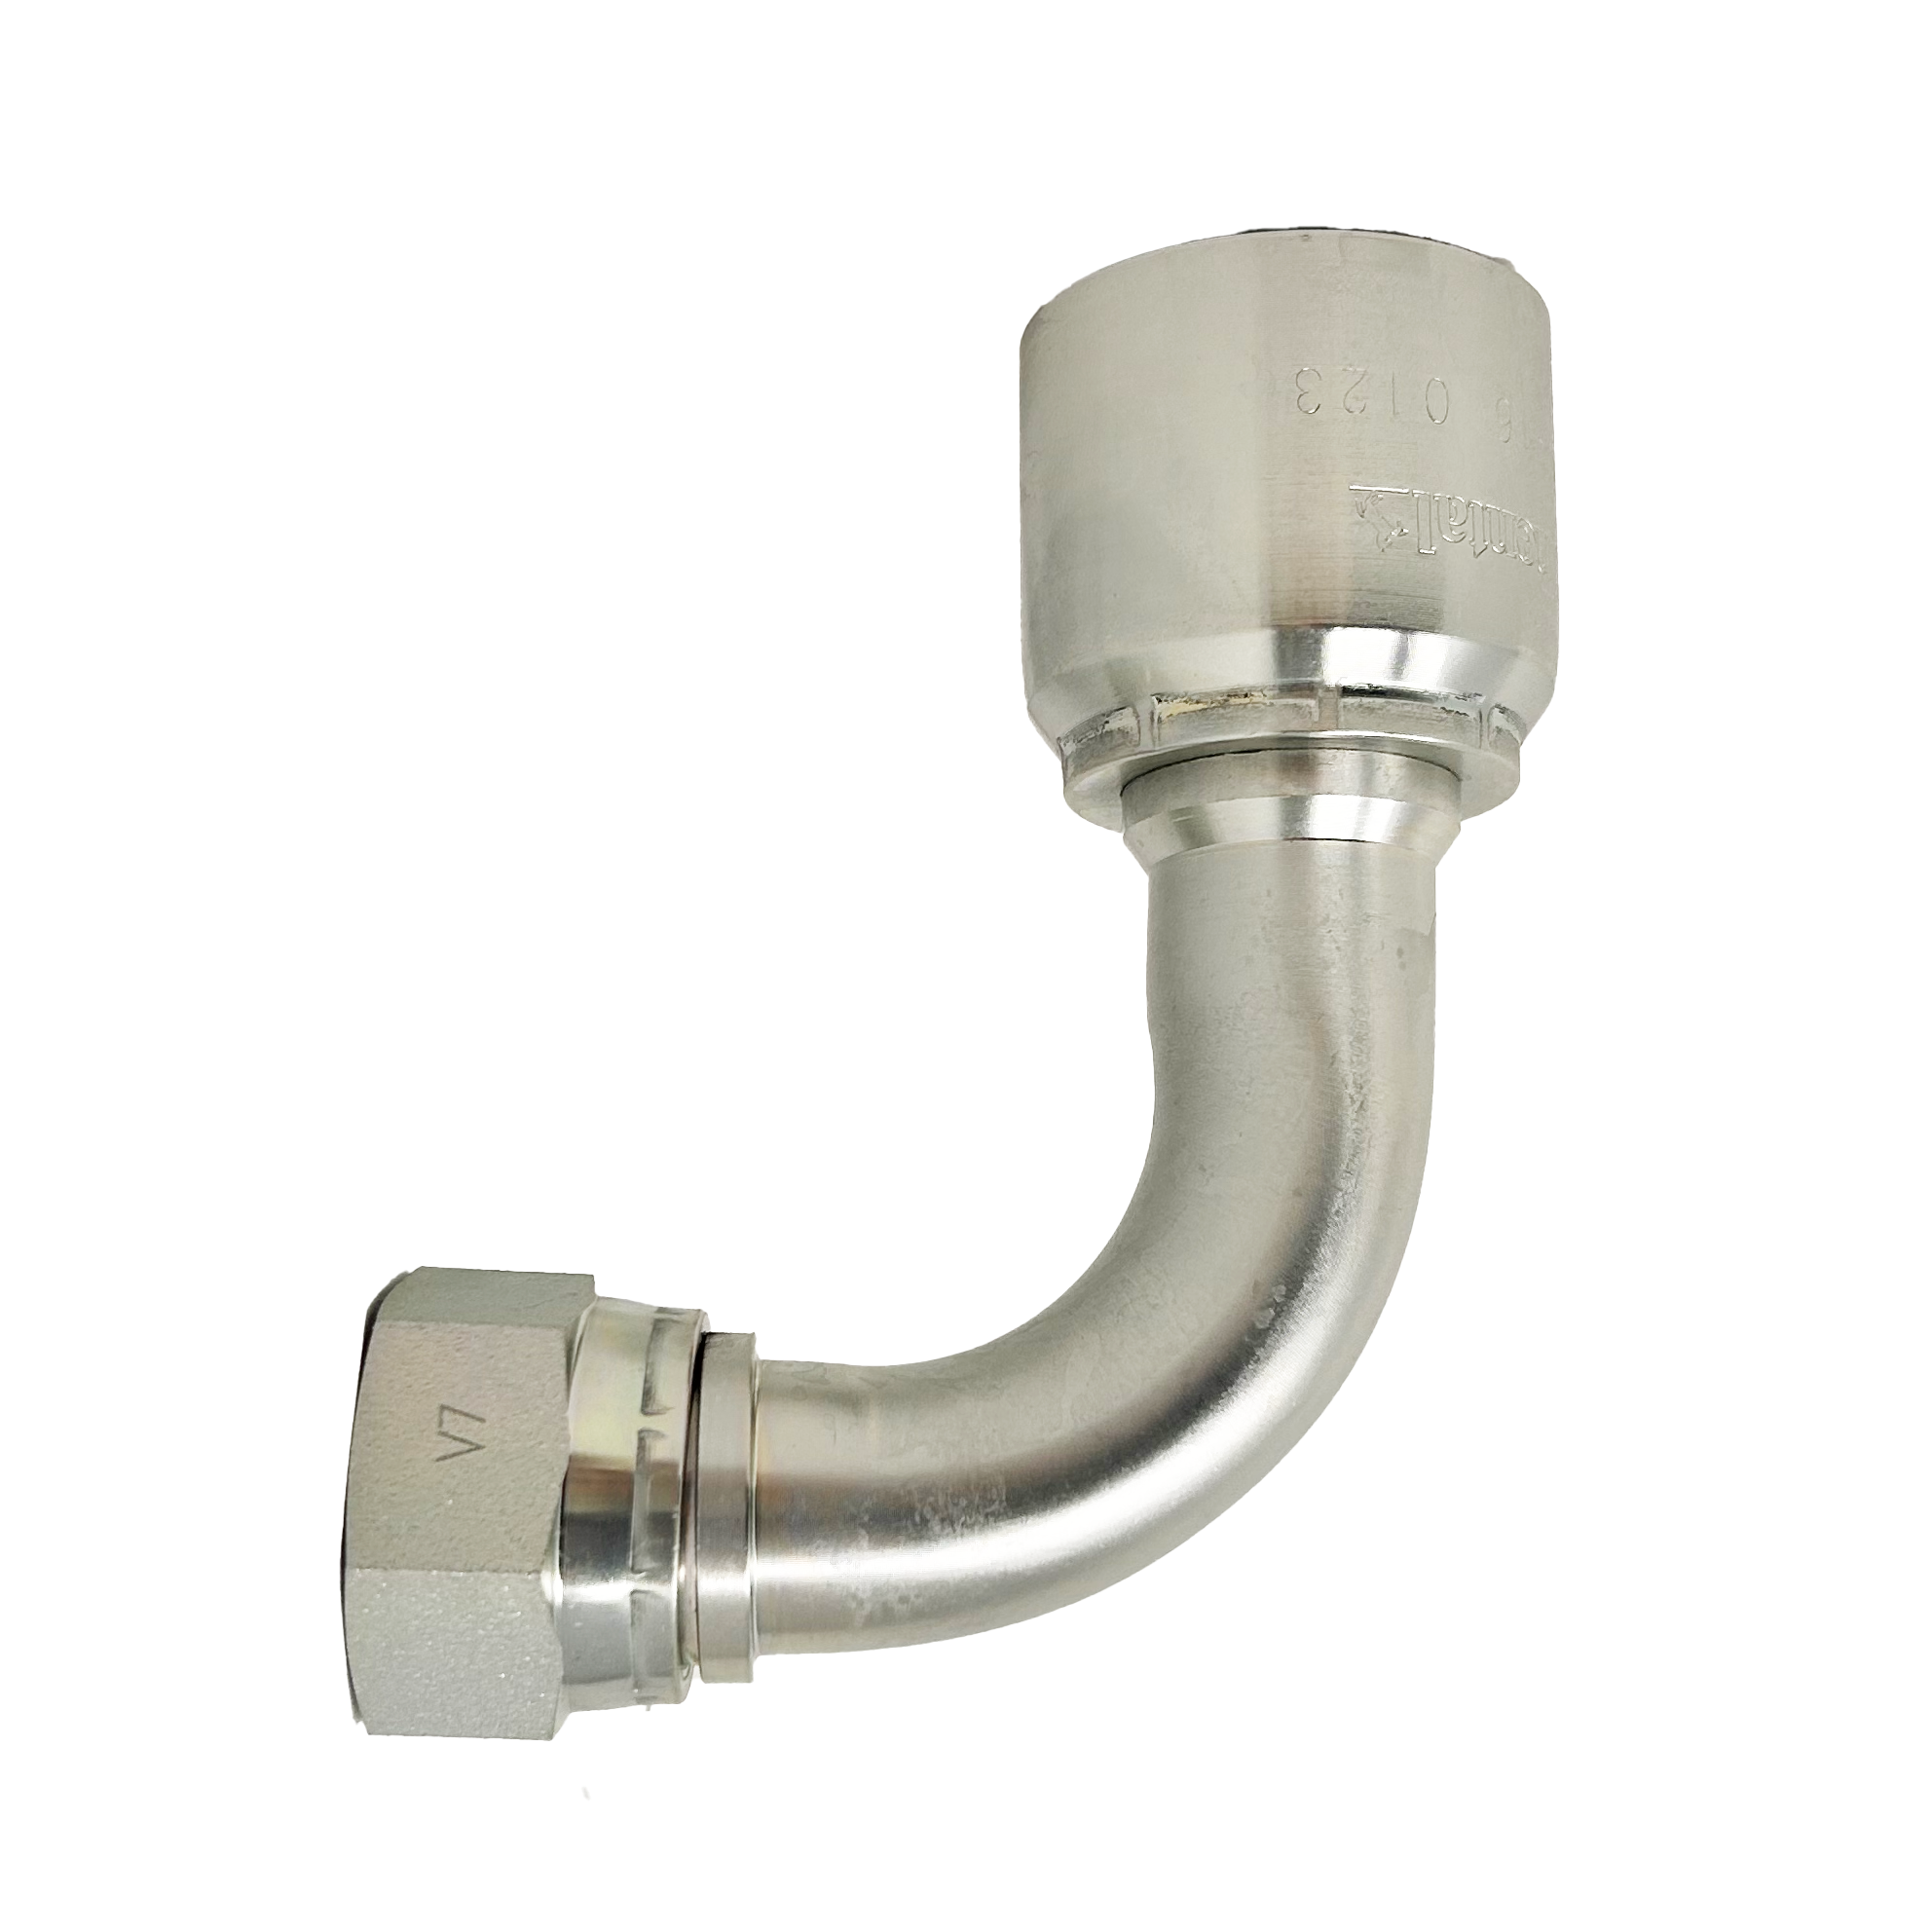 B2-JCFX90-2020: Continental Hose Fitting, 1.25 (1-1/4") Hose ID x 1-5/8-12 Female JIC, 90-Degree Swivel Connection